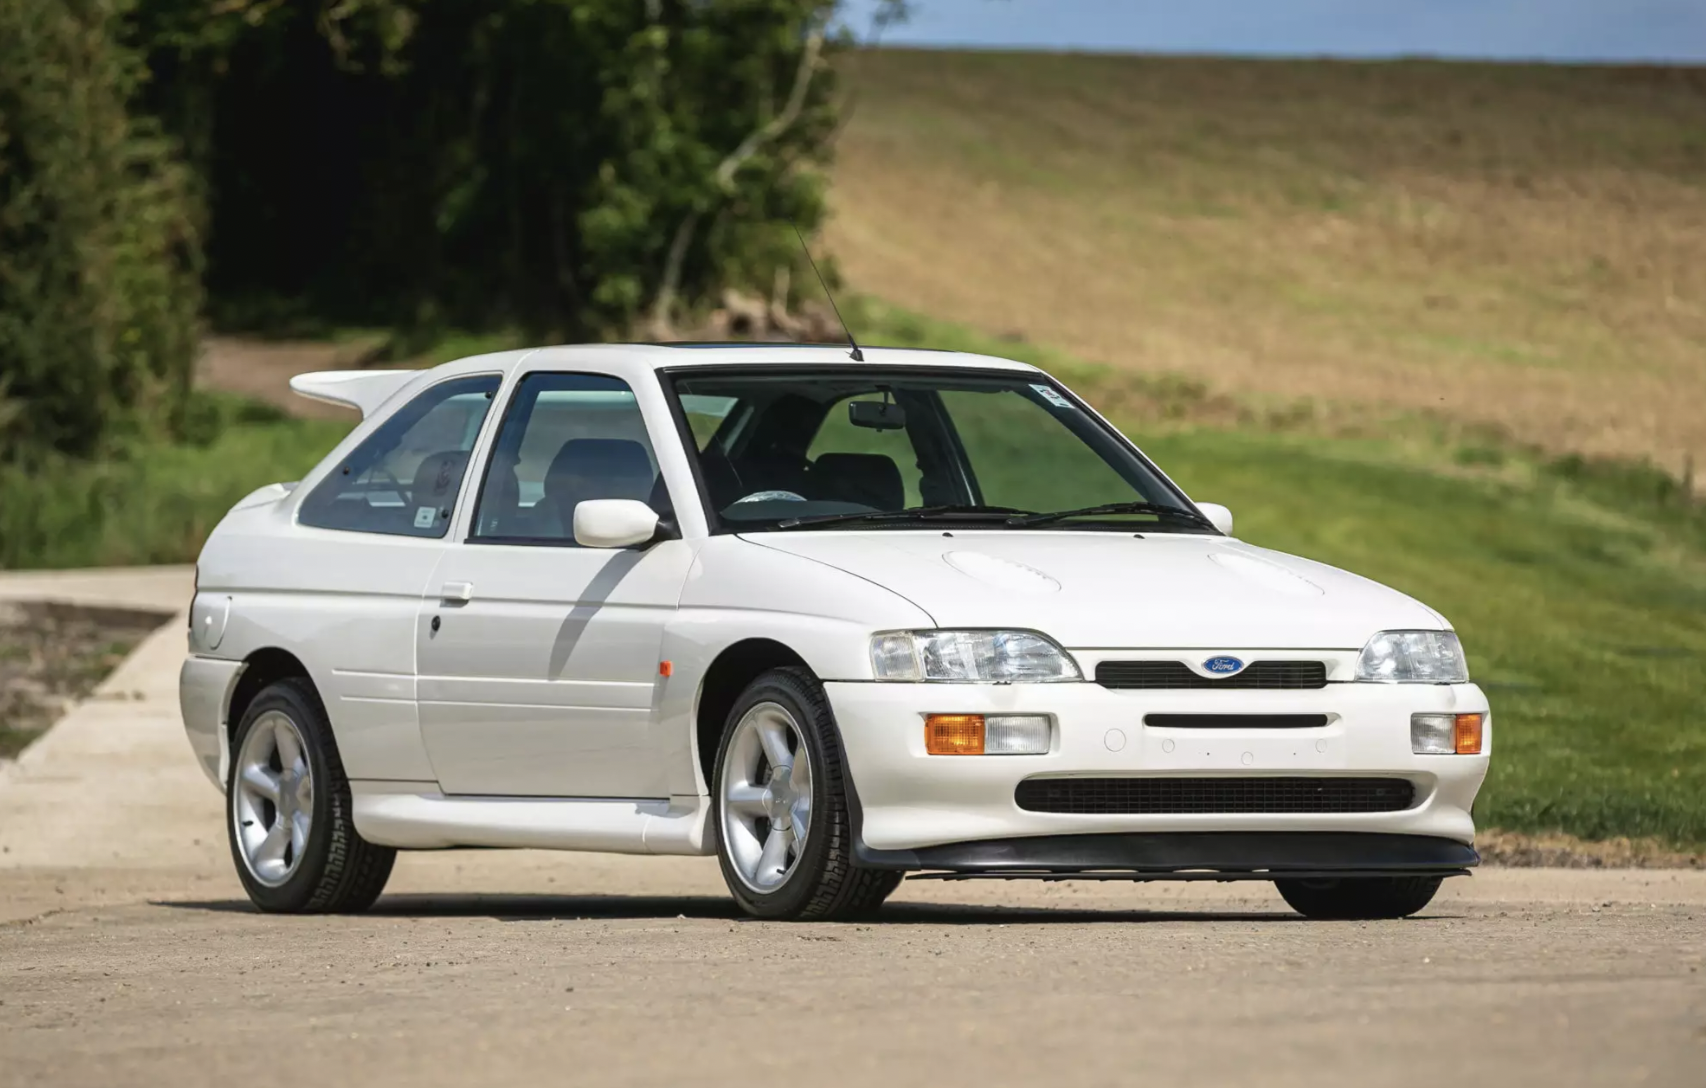 Low-mileage Fords head to auction